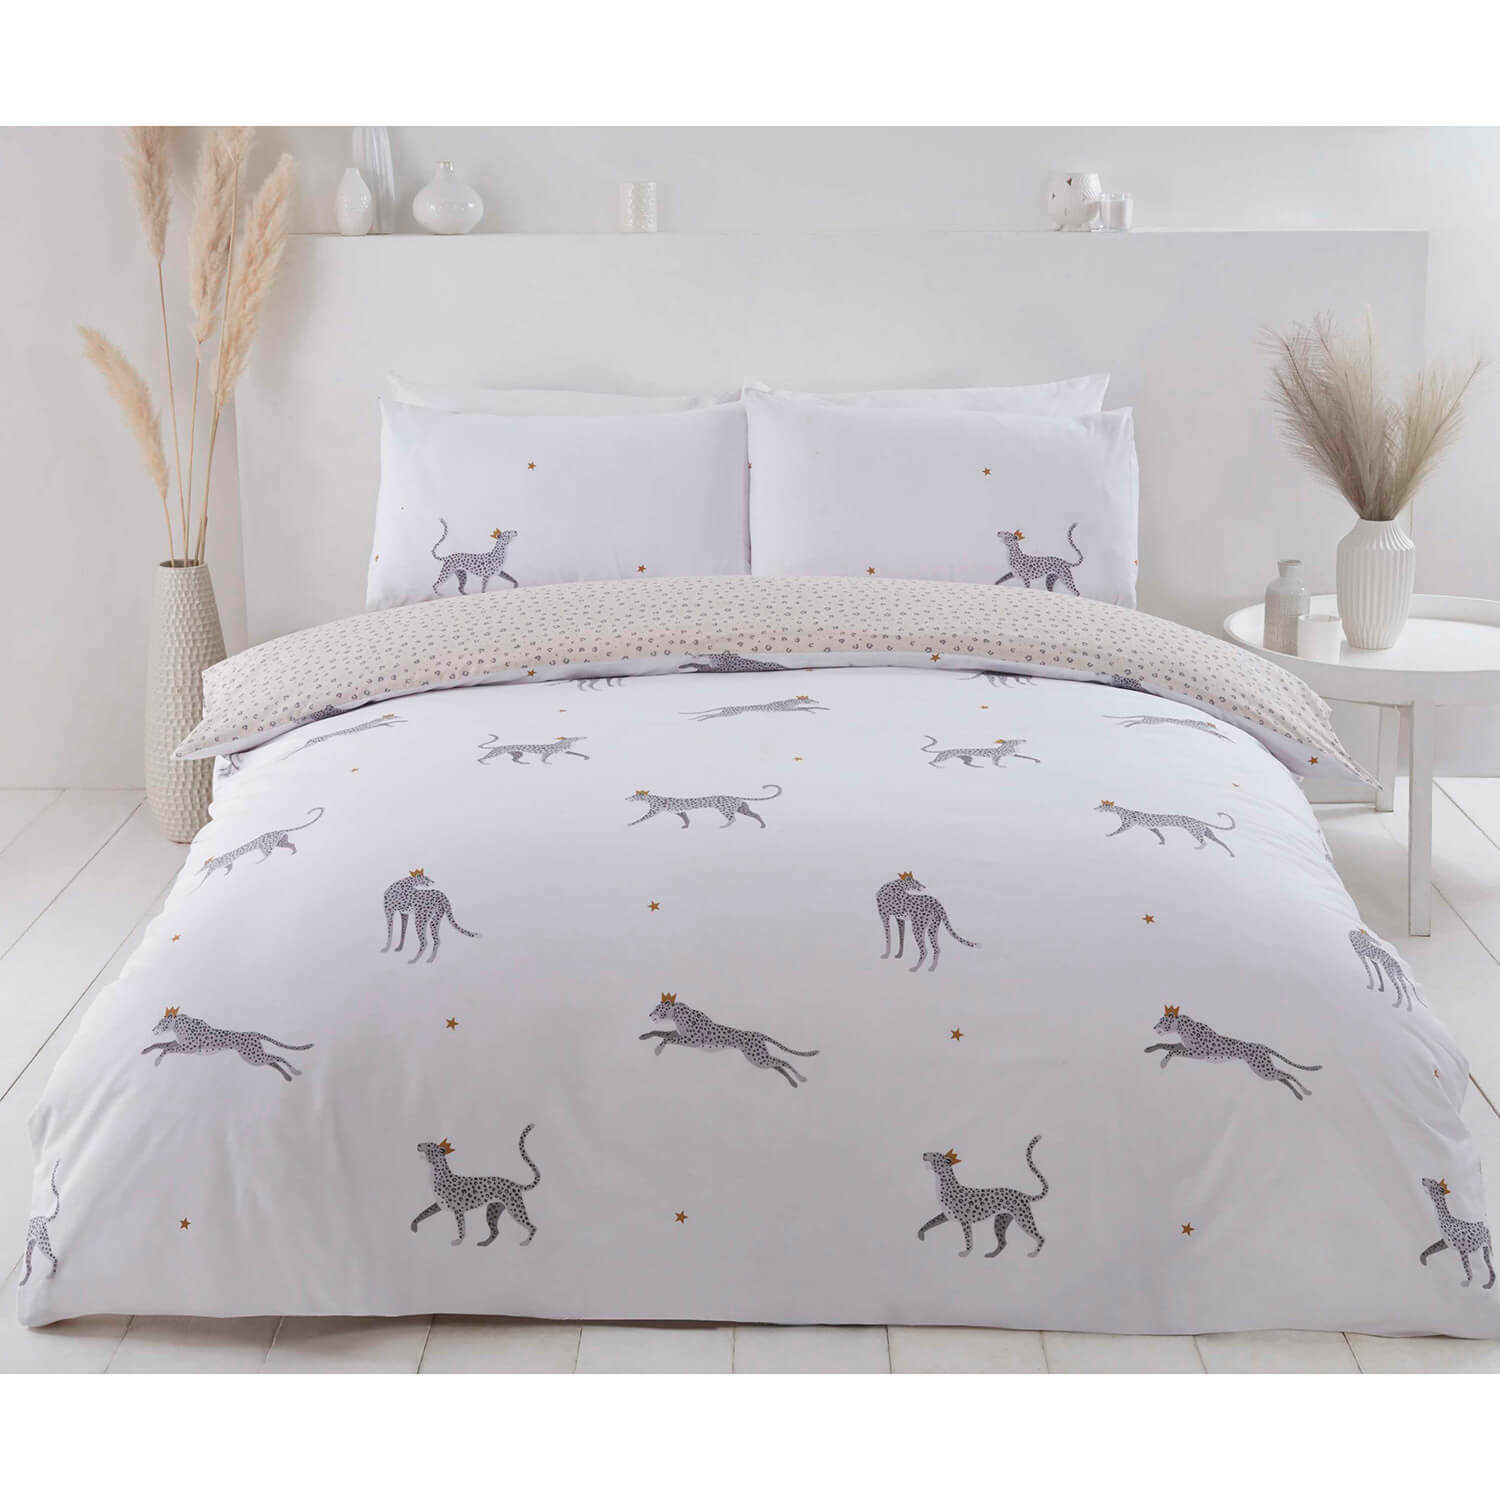  The Home Collection Leopard Duvet Cover Set - Multi 1 Shaws Department Stores